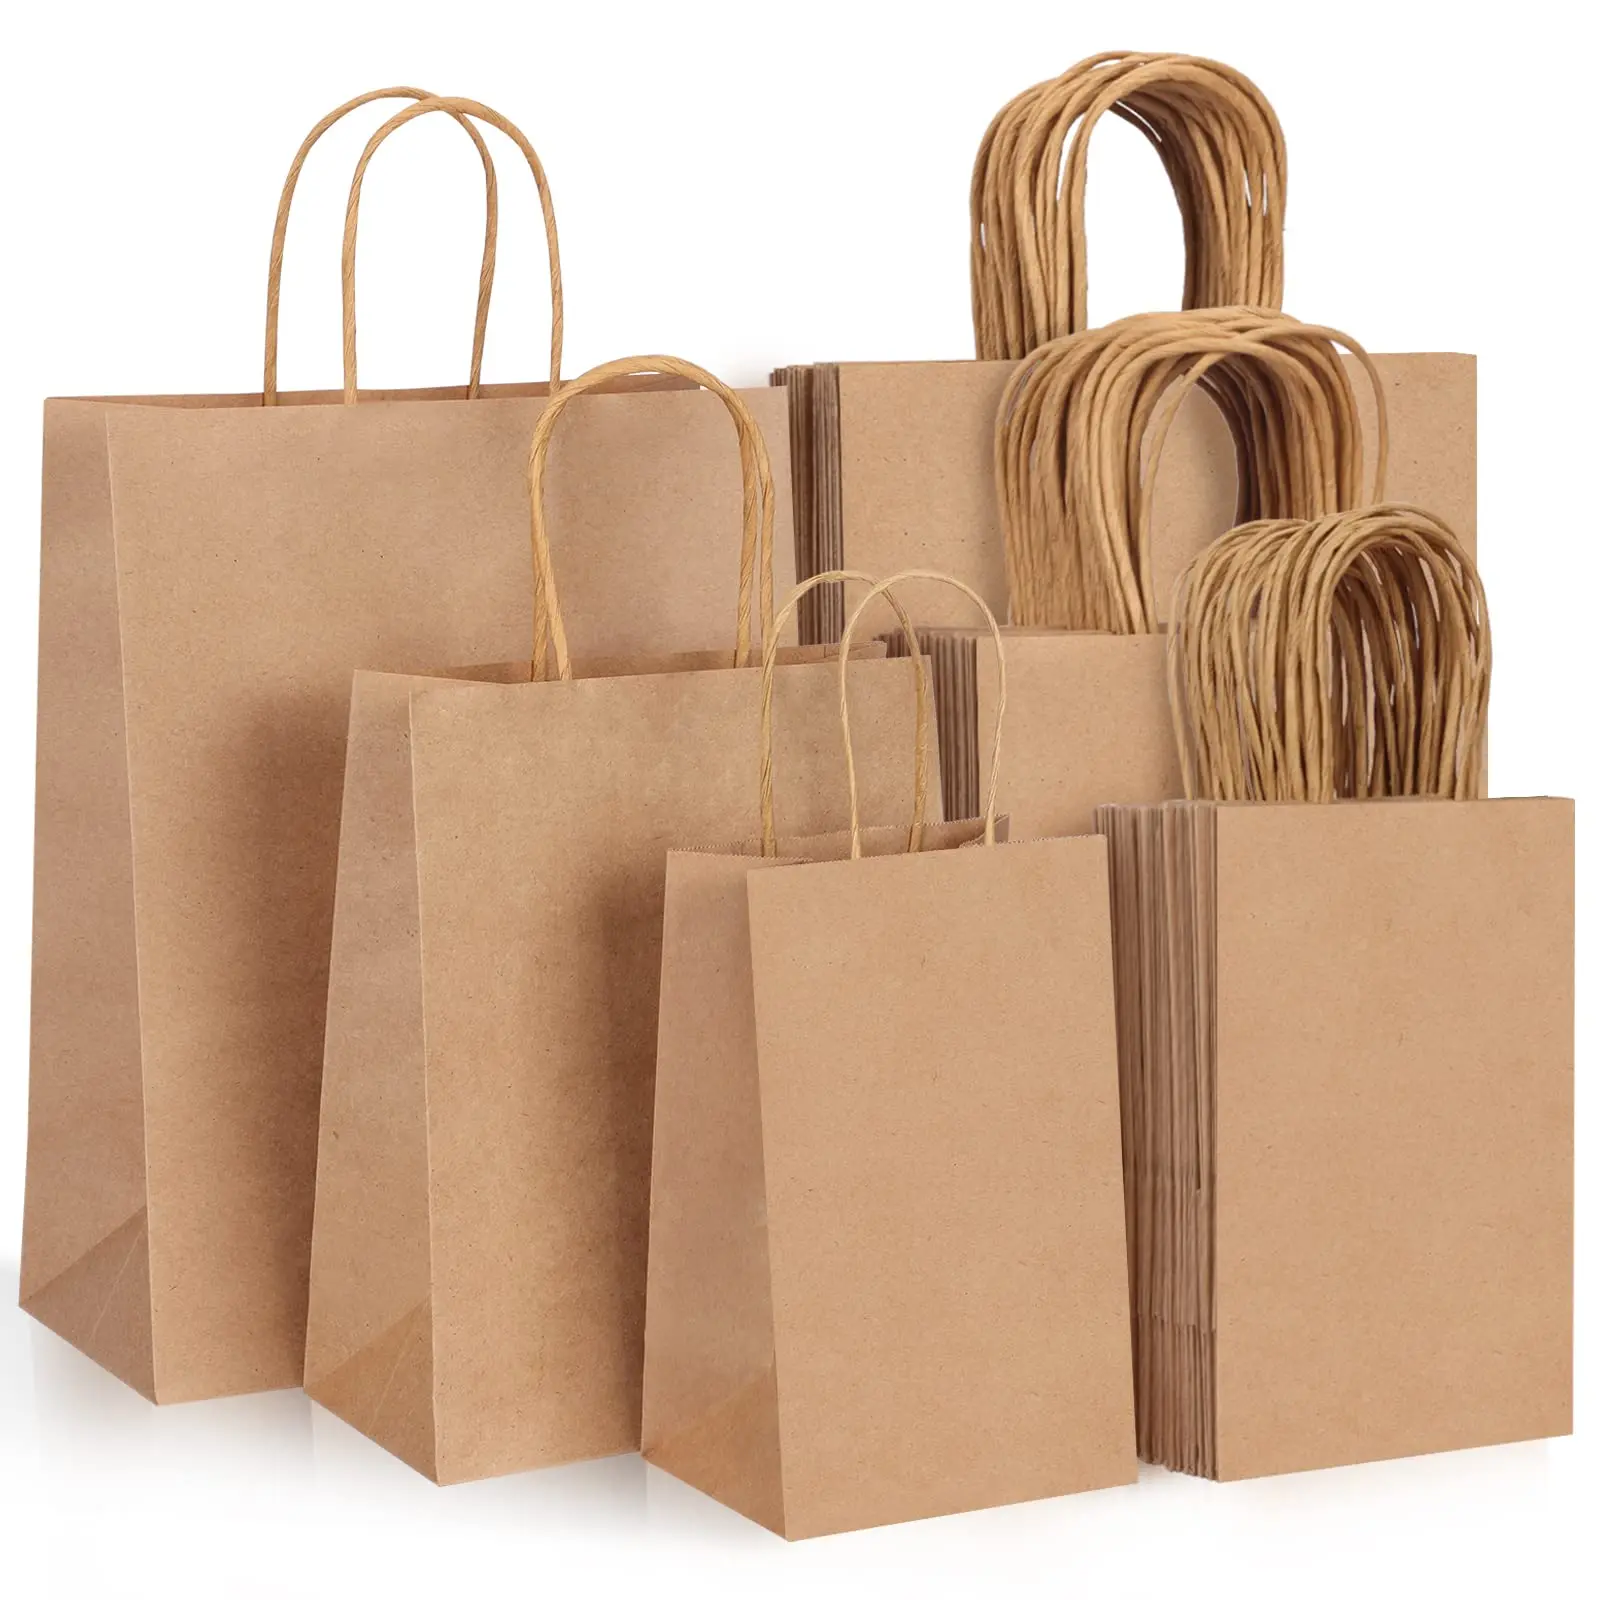 10/20pcs Kraft Paper Bags with Handles Gift Bags Small Paper Bags for Party Favor Bags White Brown Small Business Shopping Bags